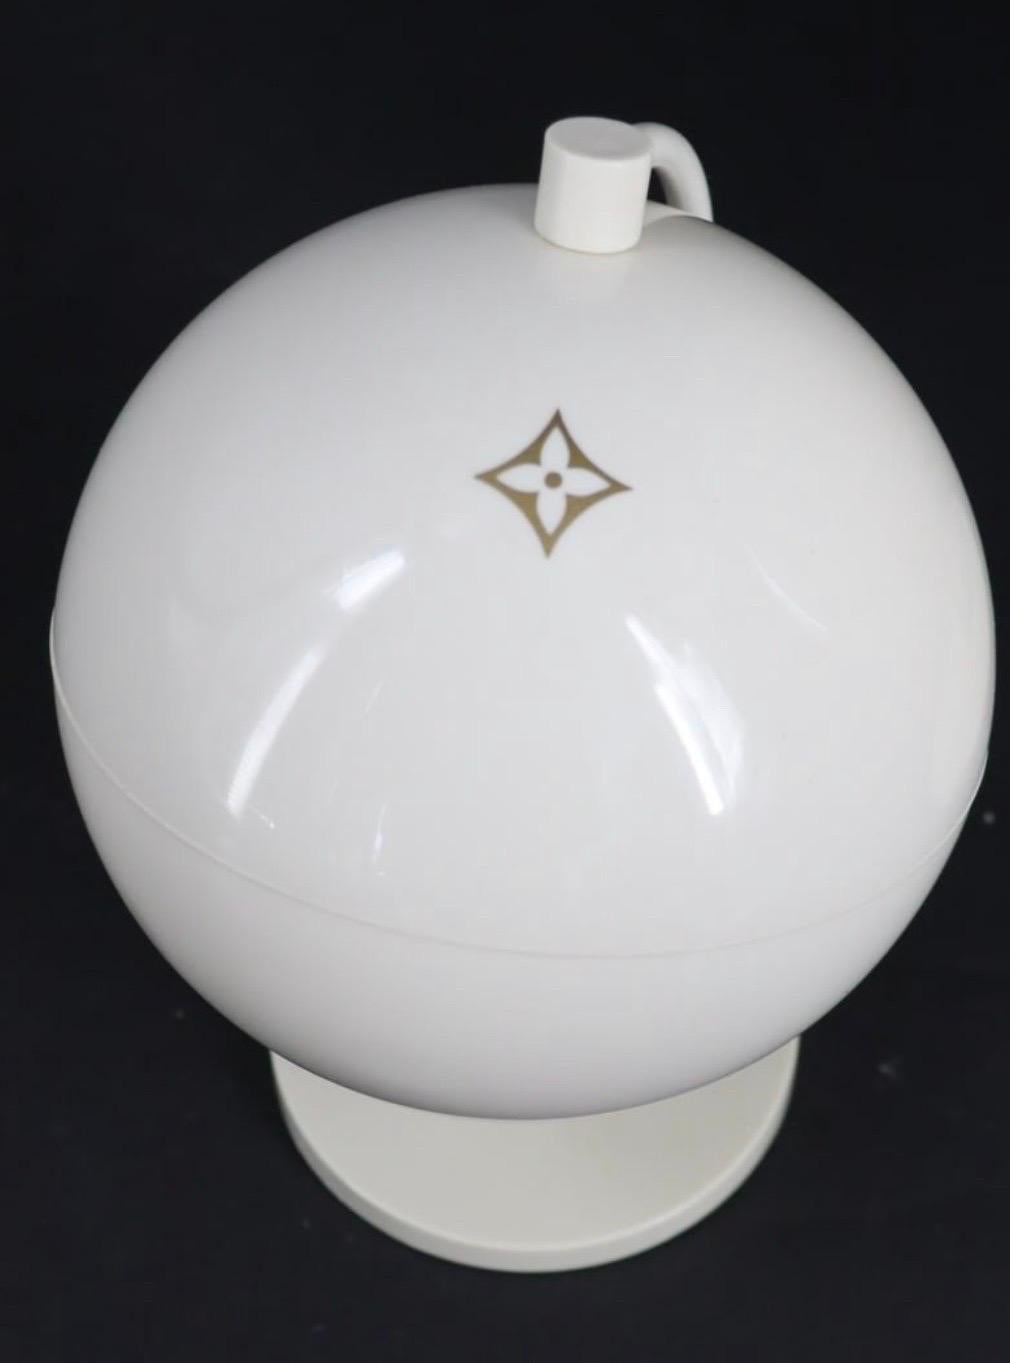 Post modern set of 2 Louis Vuitton white globes from a New York City Louis Vuitton store promotional display.  Features spinning globes with white surfaces and icon from Louis Vuitton pattern.

Dimensions of each are: 14